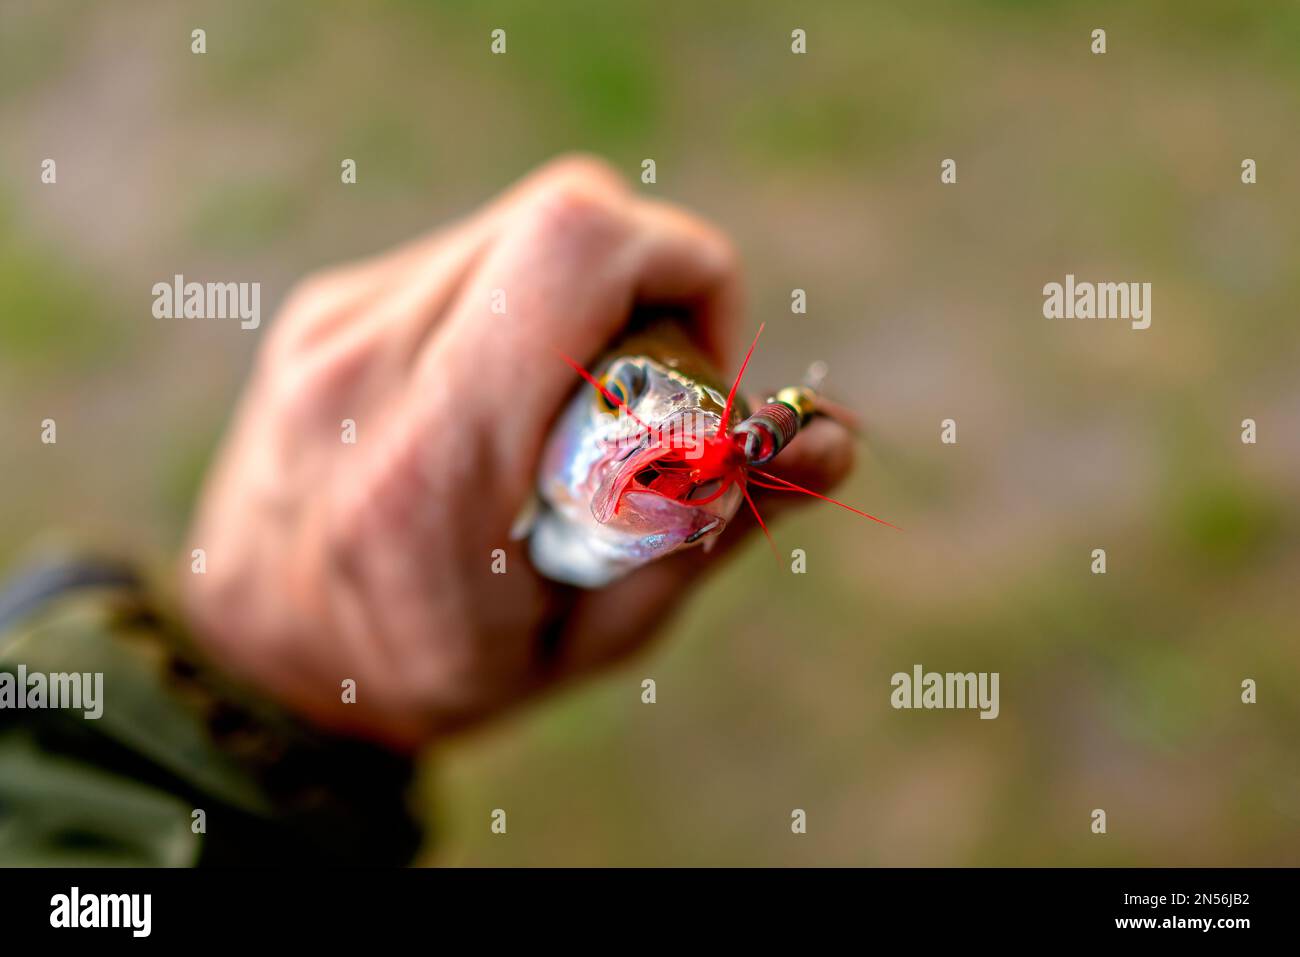 A small red tail on the hook of the fishing lure of the spinner protrudes from the mouth of the caught fish perch clutched in the hand of the angler. Stock Photo